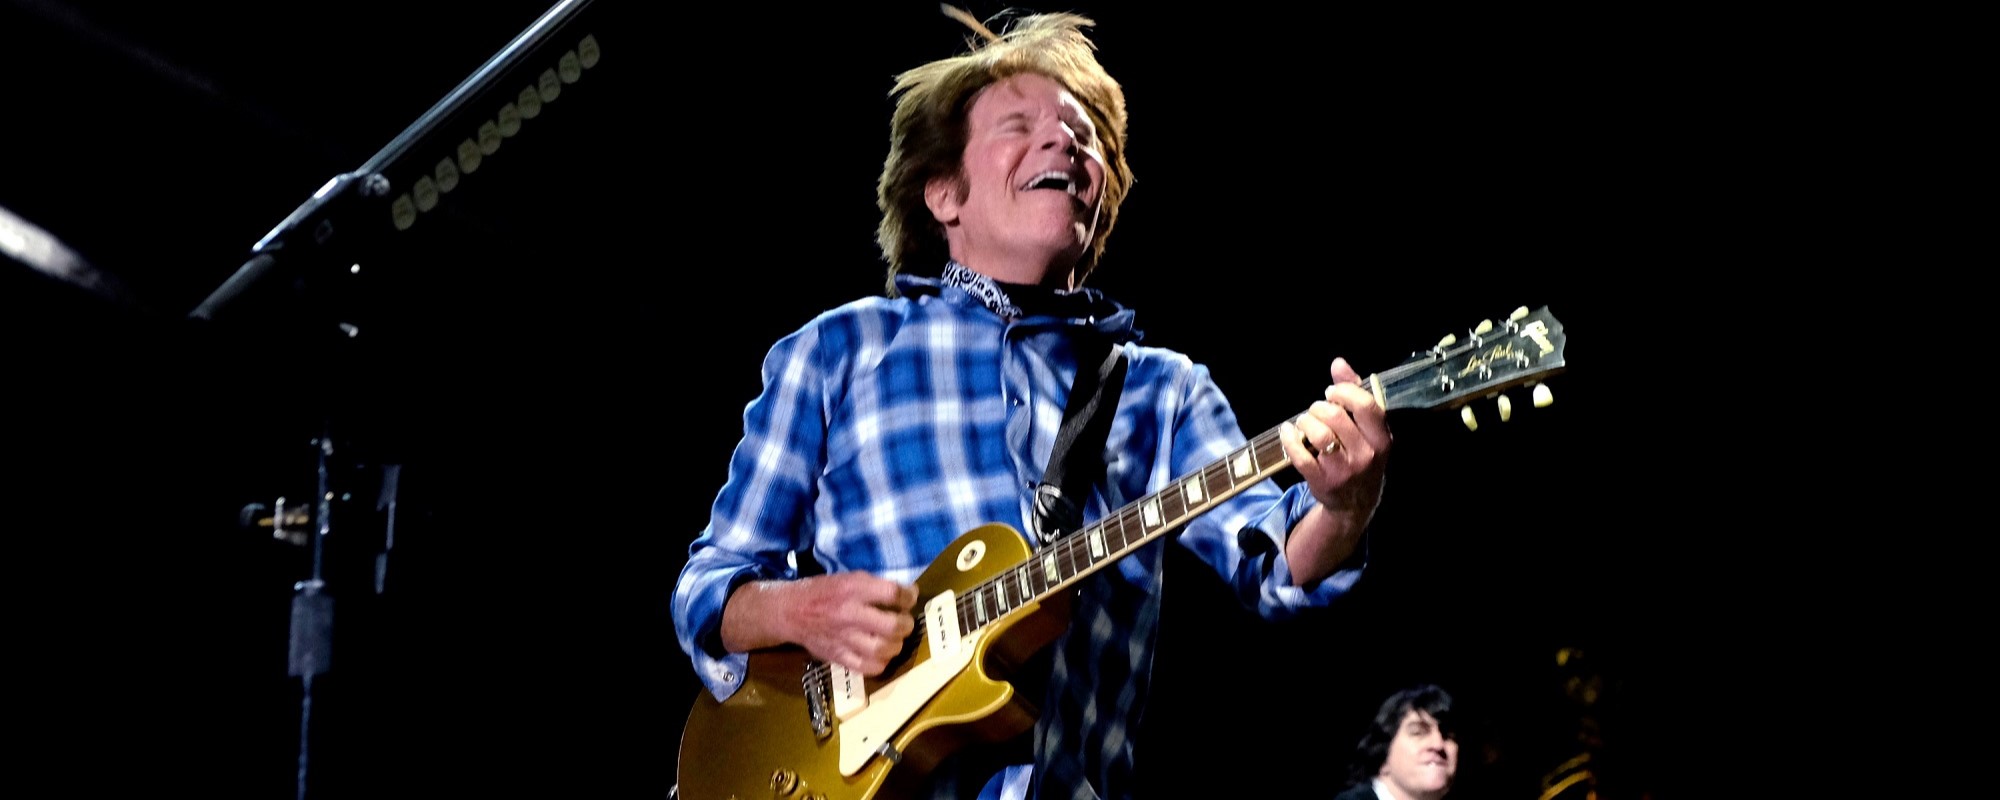 John Fogerty Shares the Sweet Childhood Memory That Inspired Him to Write a Classic CCR Song